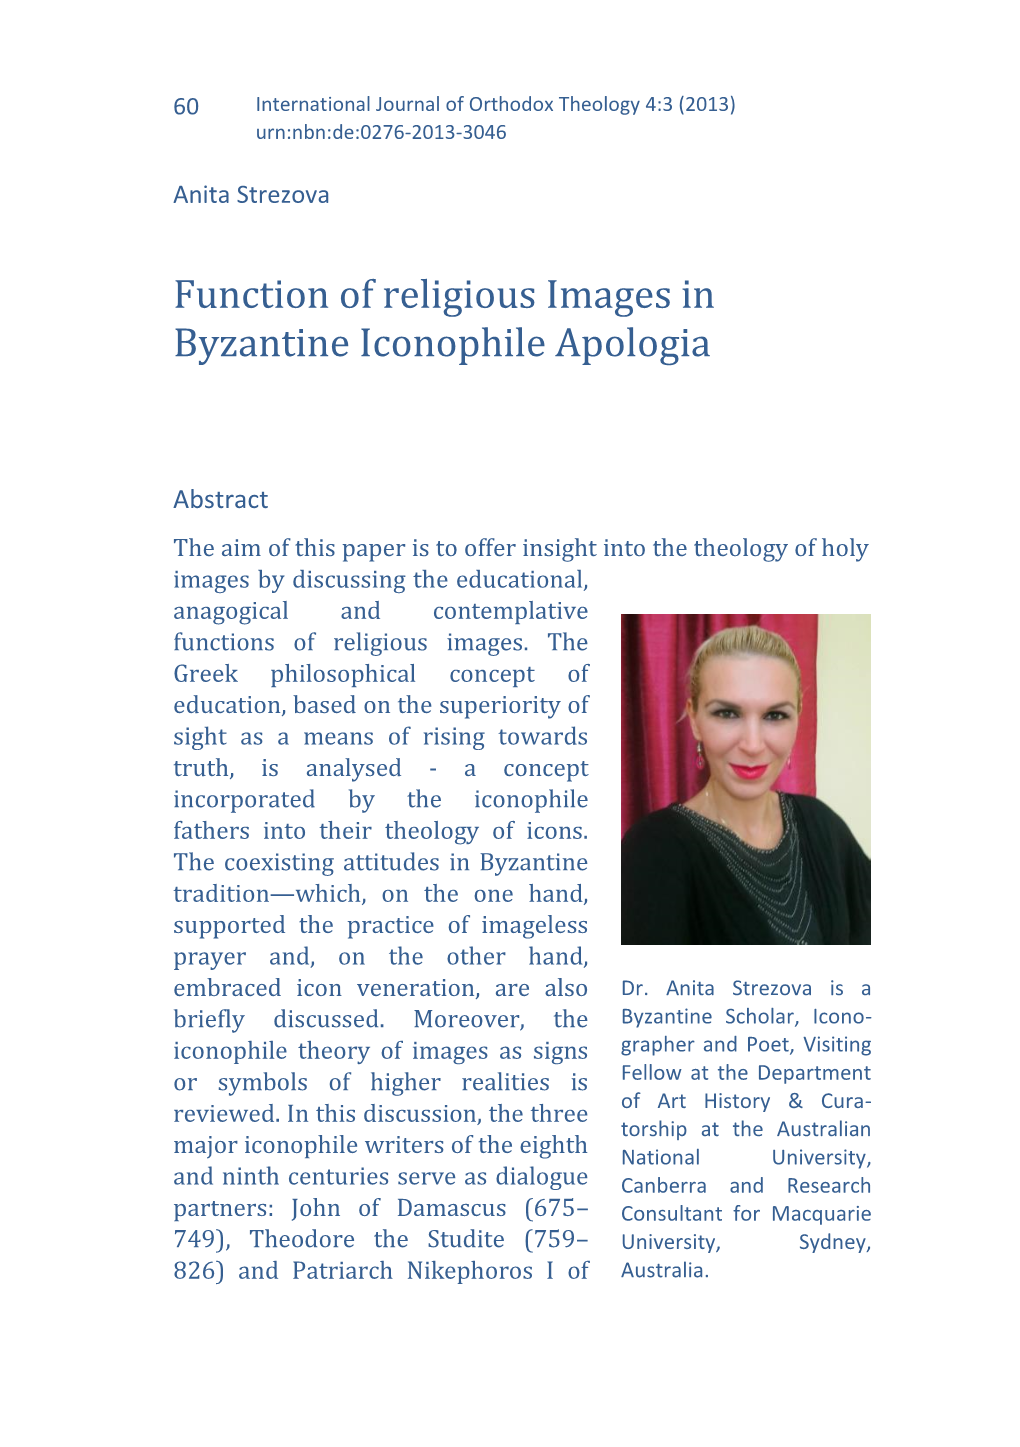 Function of Religious Images in Byzantine Iconophile Apologia